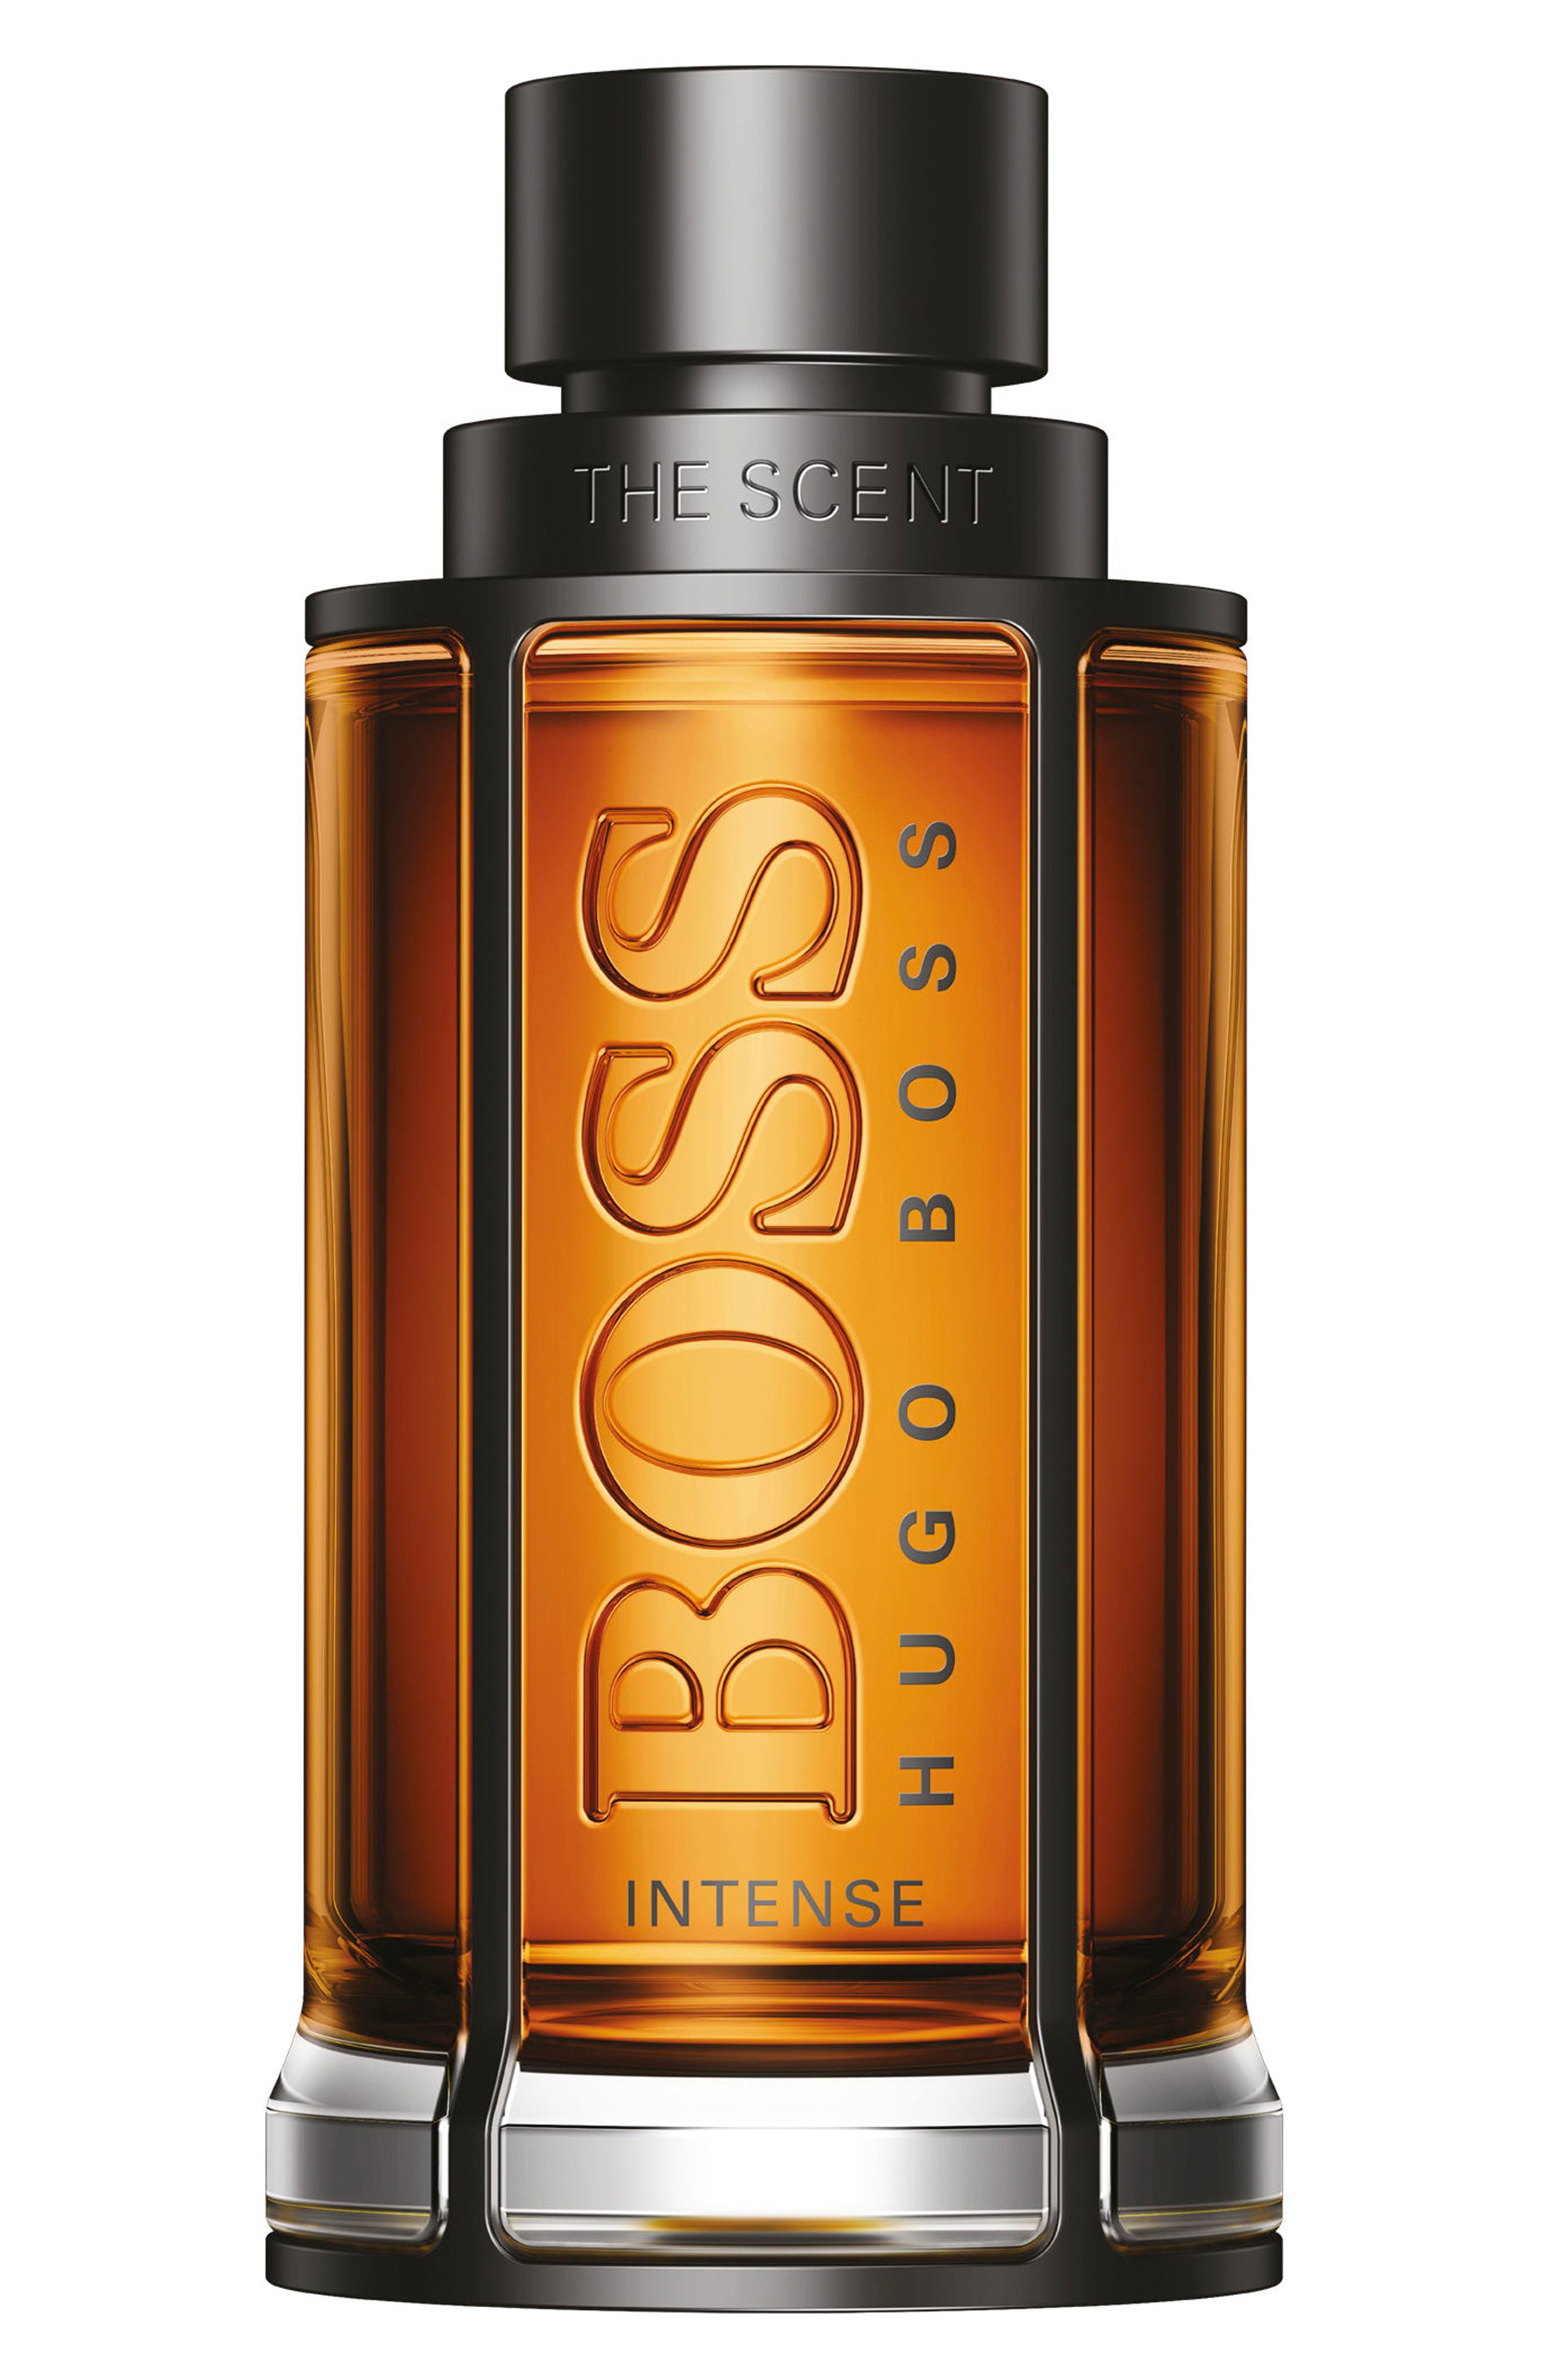 hugo boss intense notino Cheaper Than Retail Price\u003e Buy Clothing,  Accessories and lifestyle products for women \u0026 men -